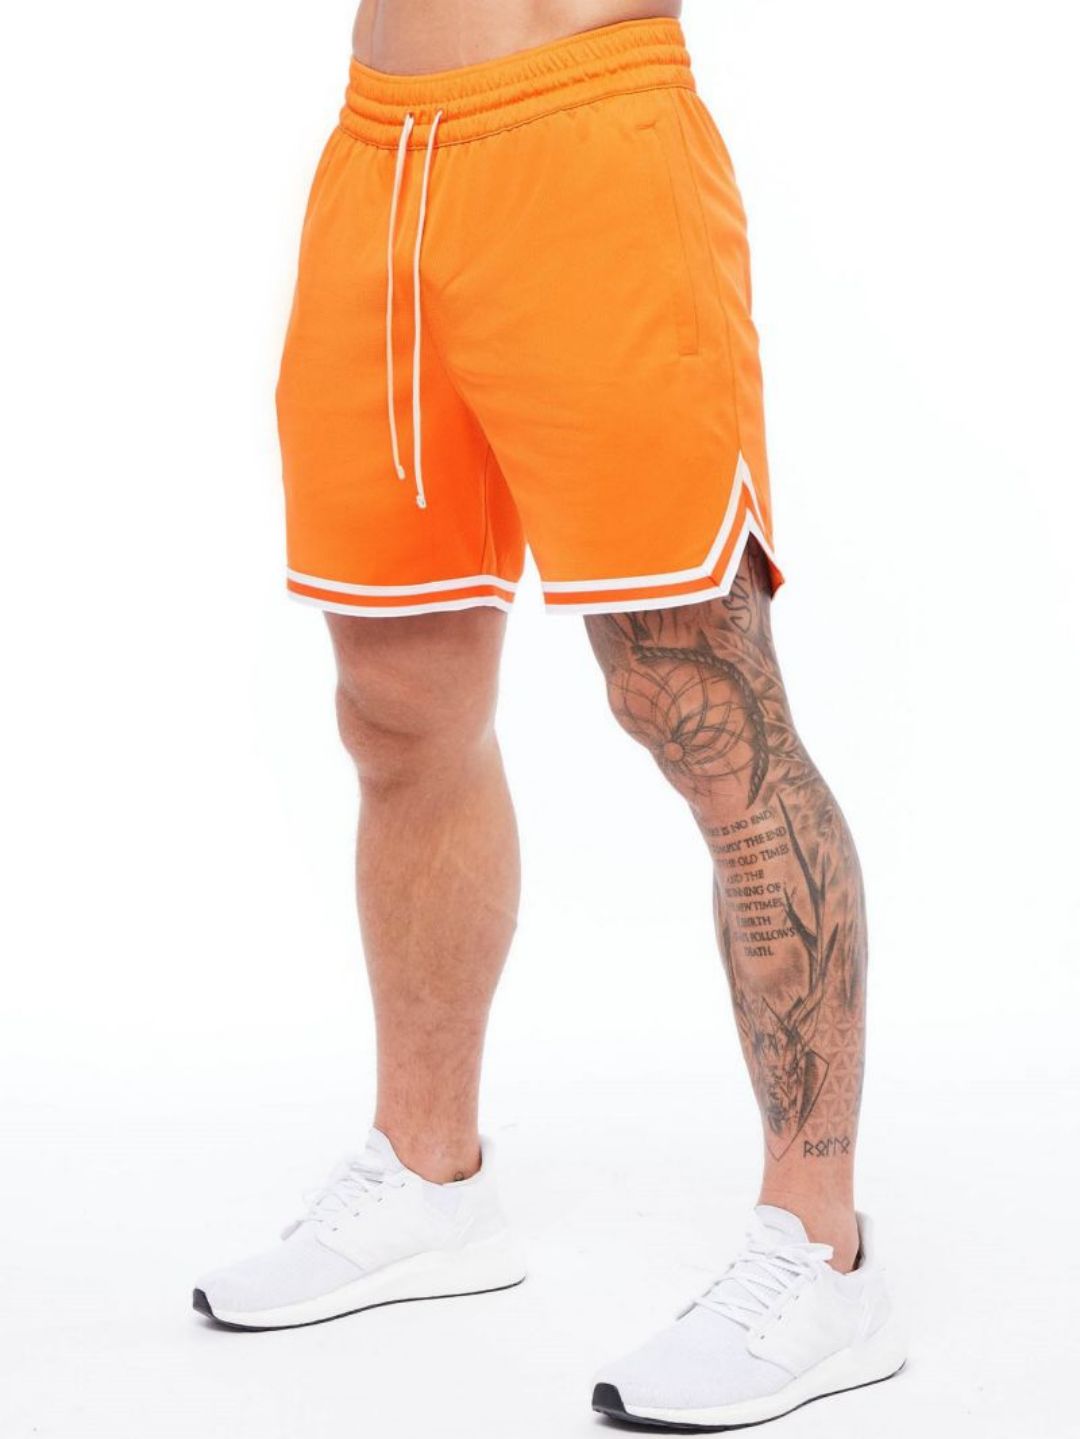 Men's Fitness Mesh Breathable Gym Shorts